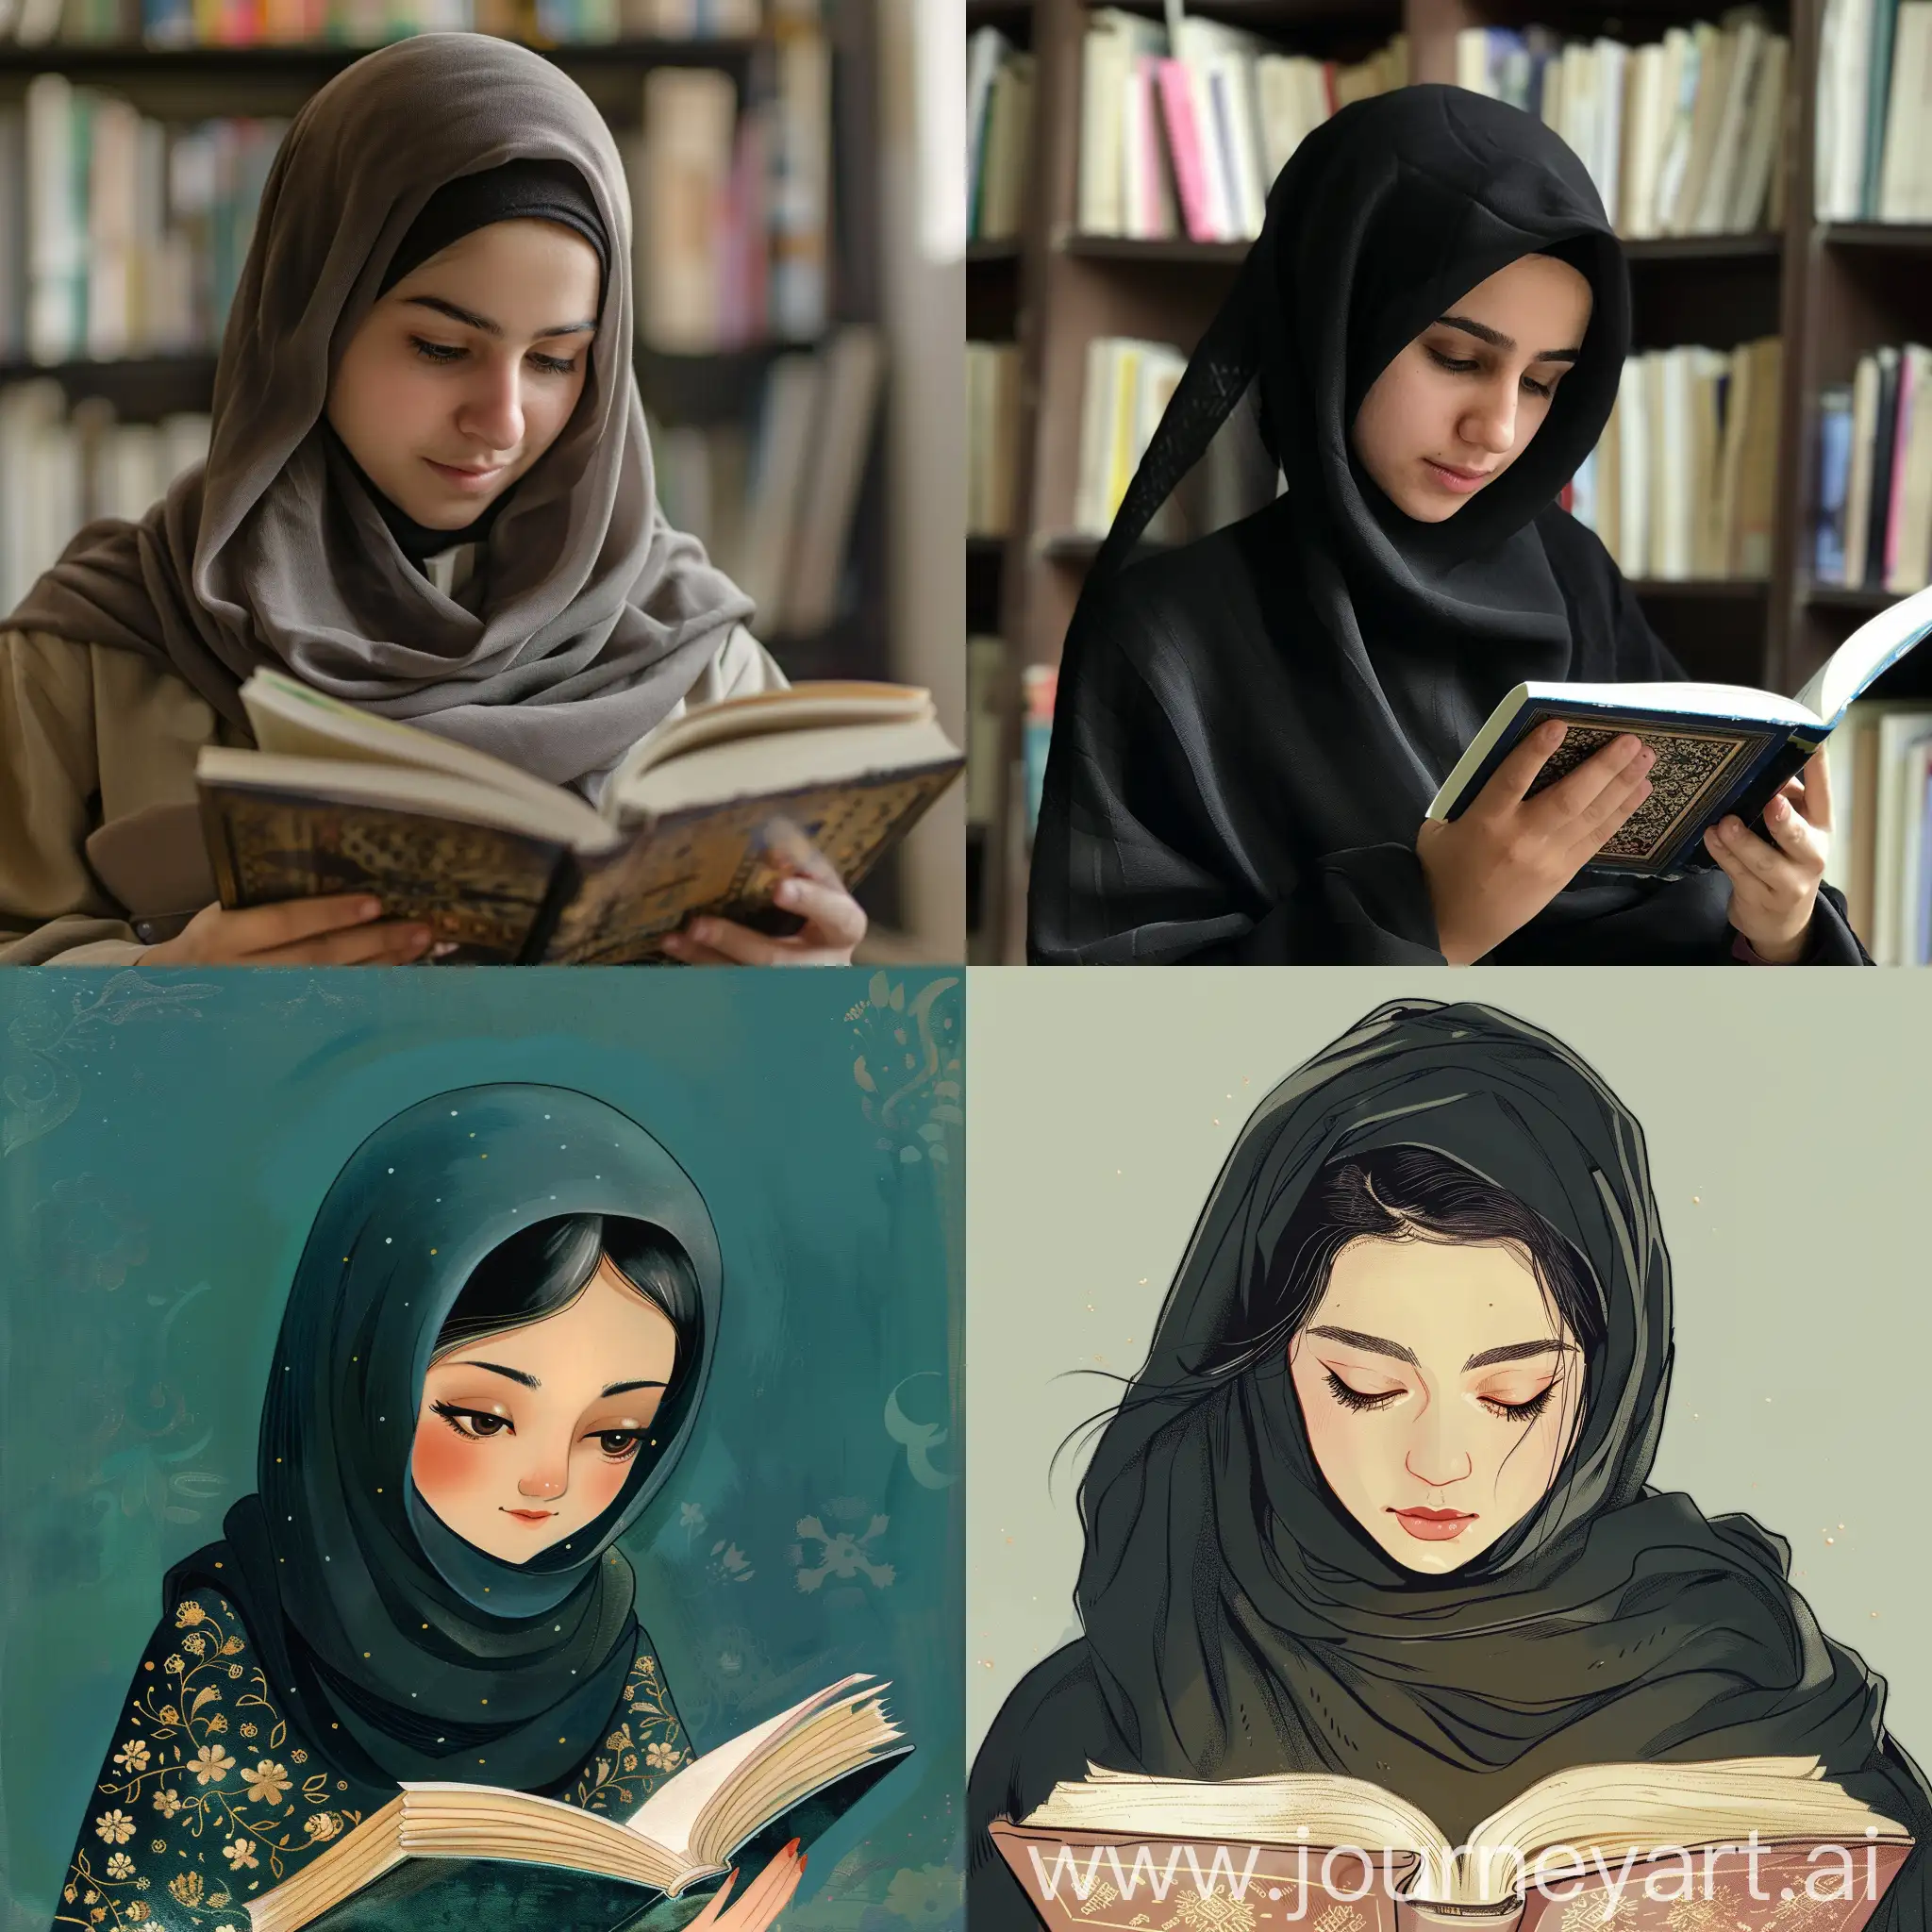 Young-Iranian-Girl-in-Hijab-Reading-Book